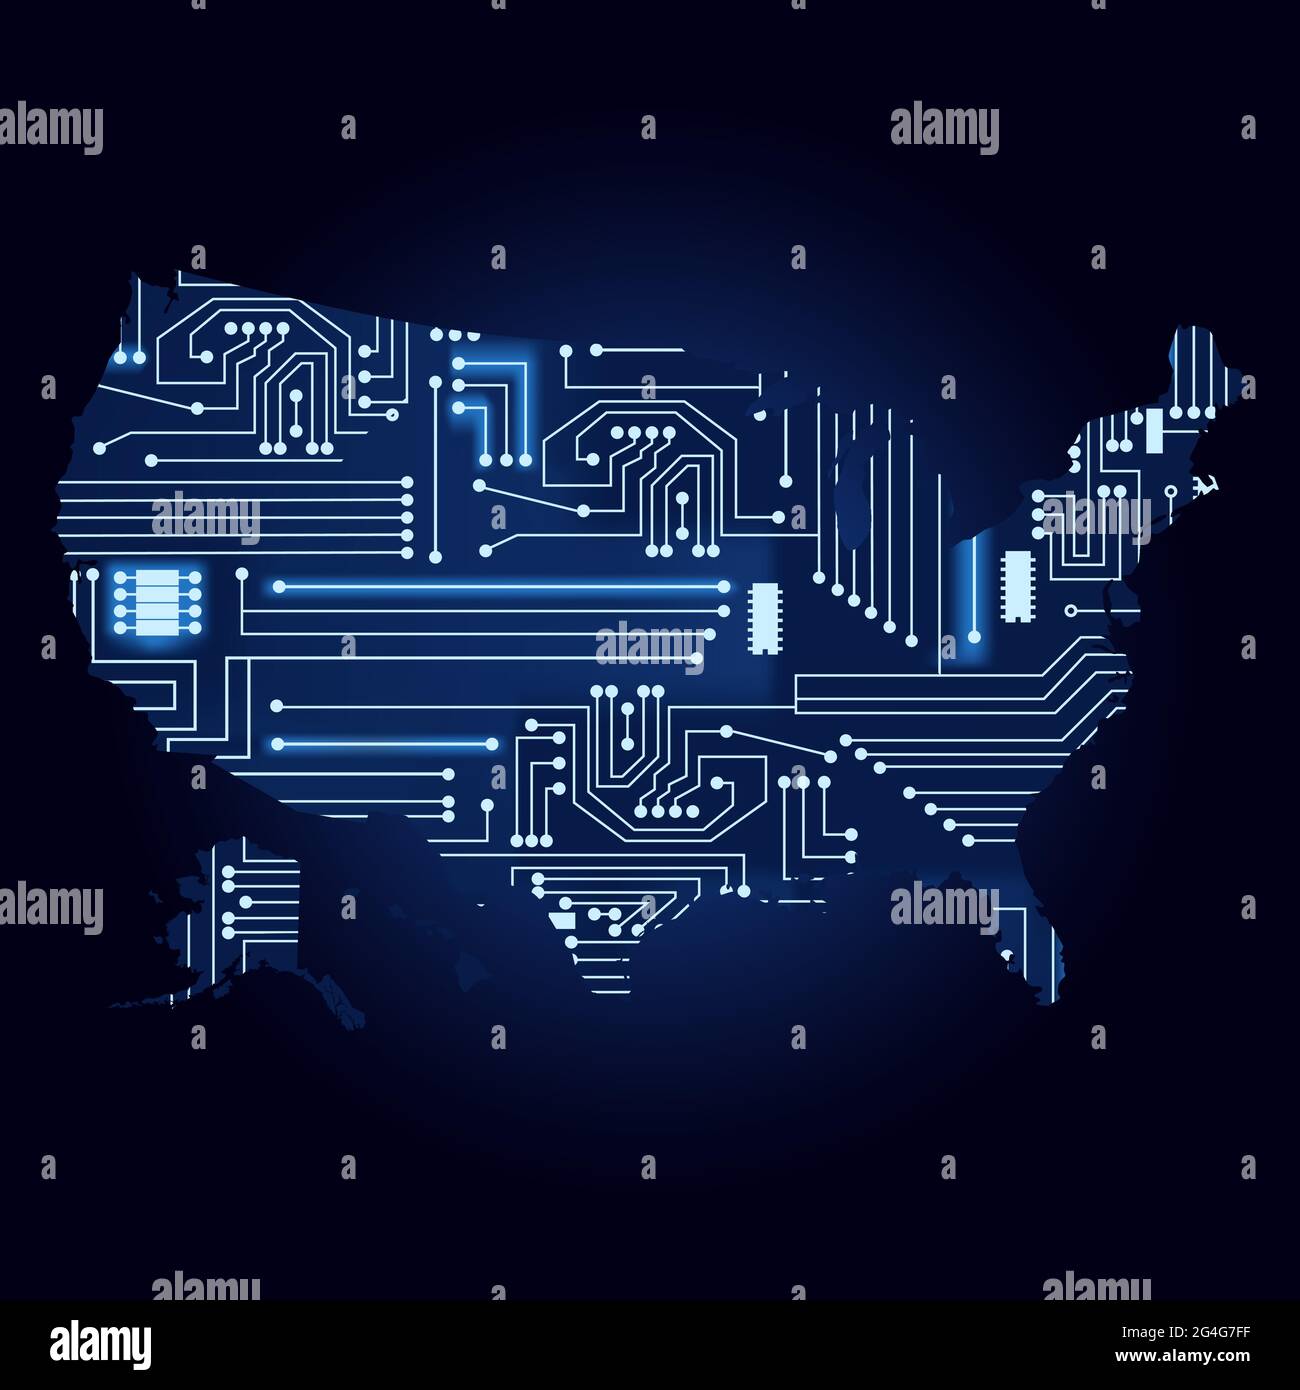 Contour map of United States with a technological electronics circuit. Stock Vector